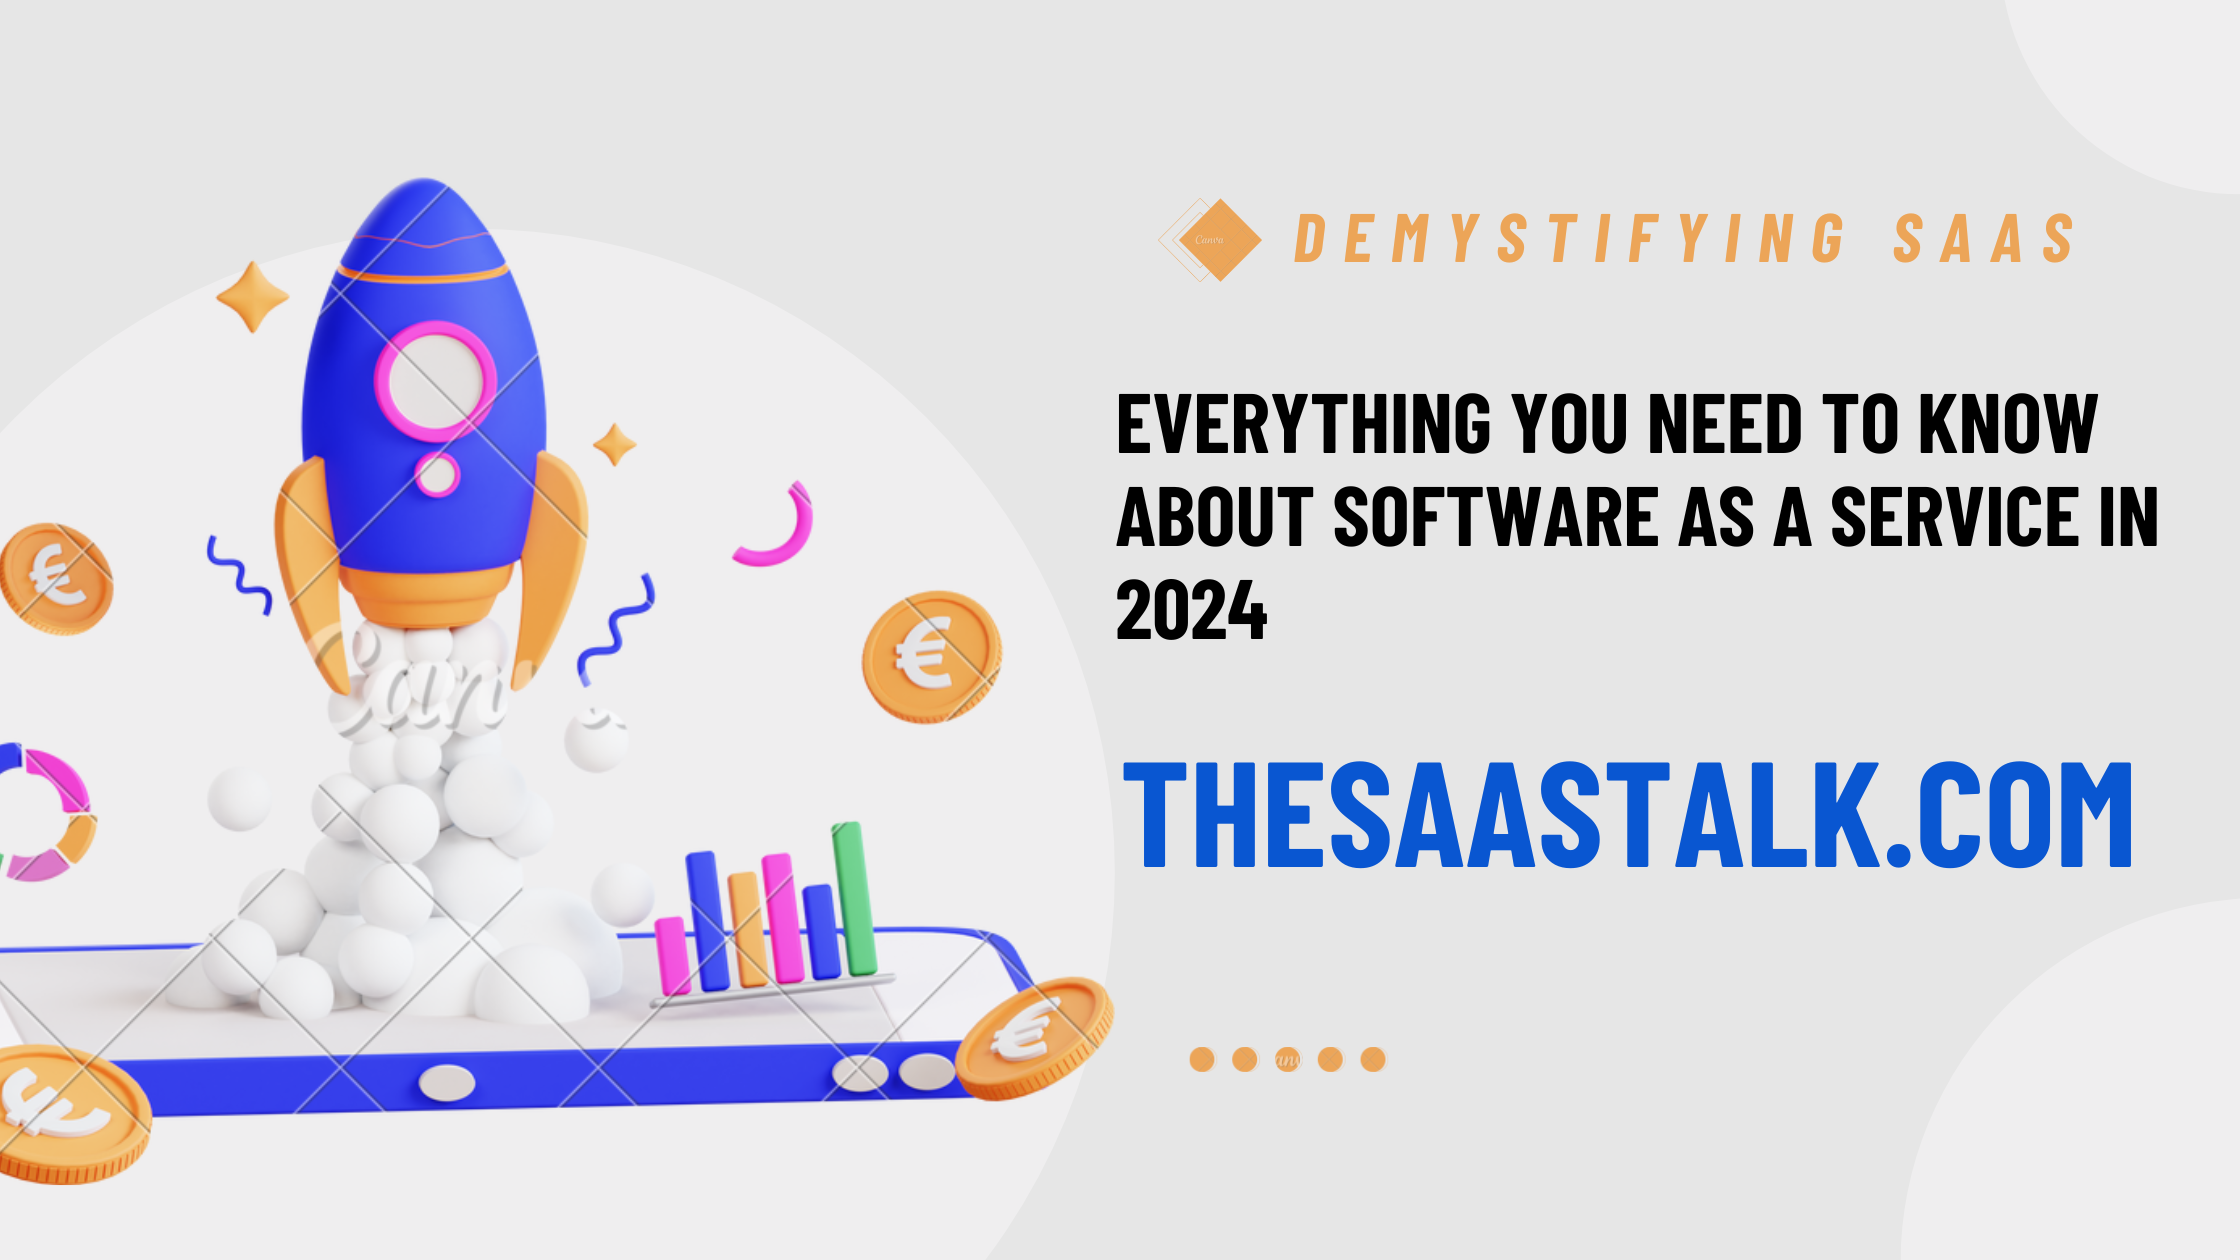 Demystifying-SAAS-Everything-you-need-to-know-about-Software-as-a-Service-in-2024